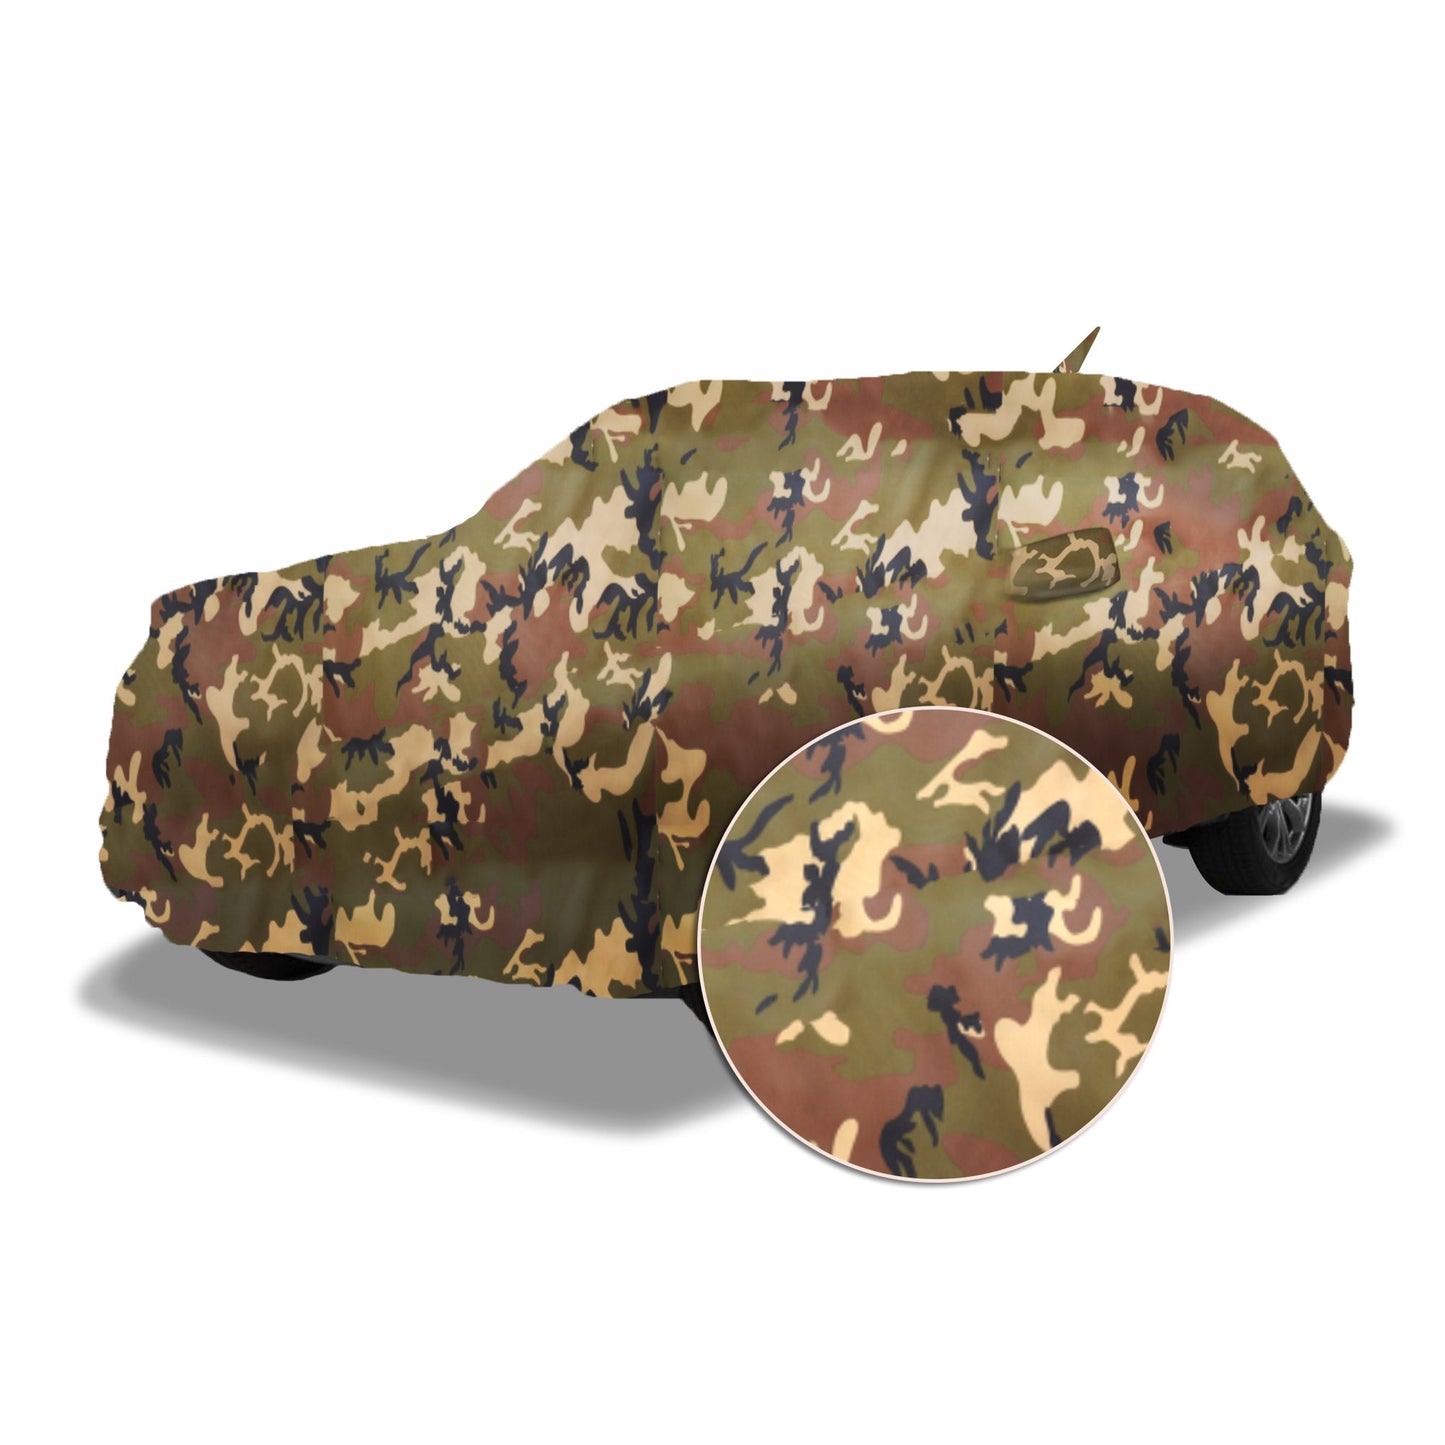 Ascot Mahindra Bolero Neo Car Body Cover Extra Strong & Dust Proof Jungle Military Car Cover with UV Proof & Water-Resistant Coating